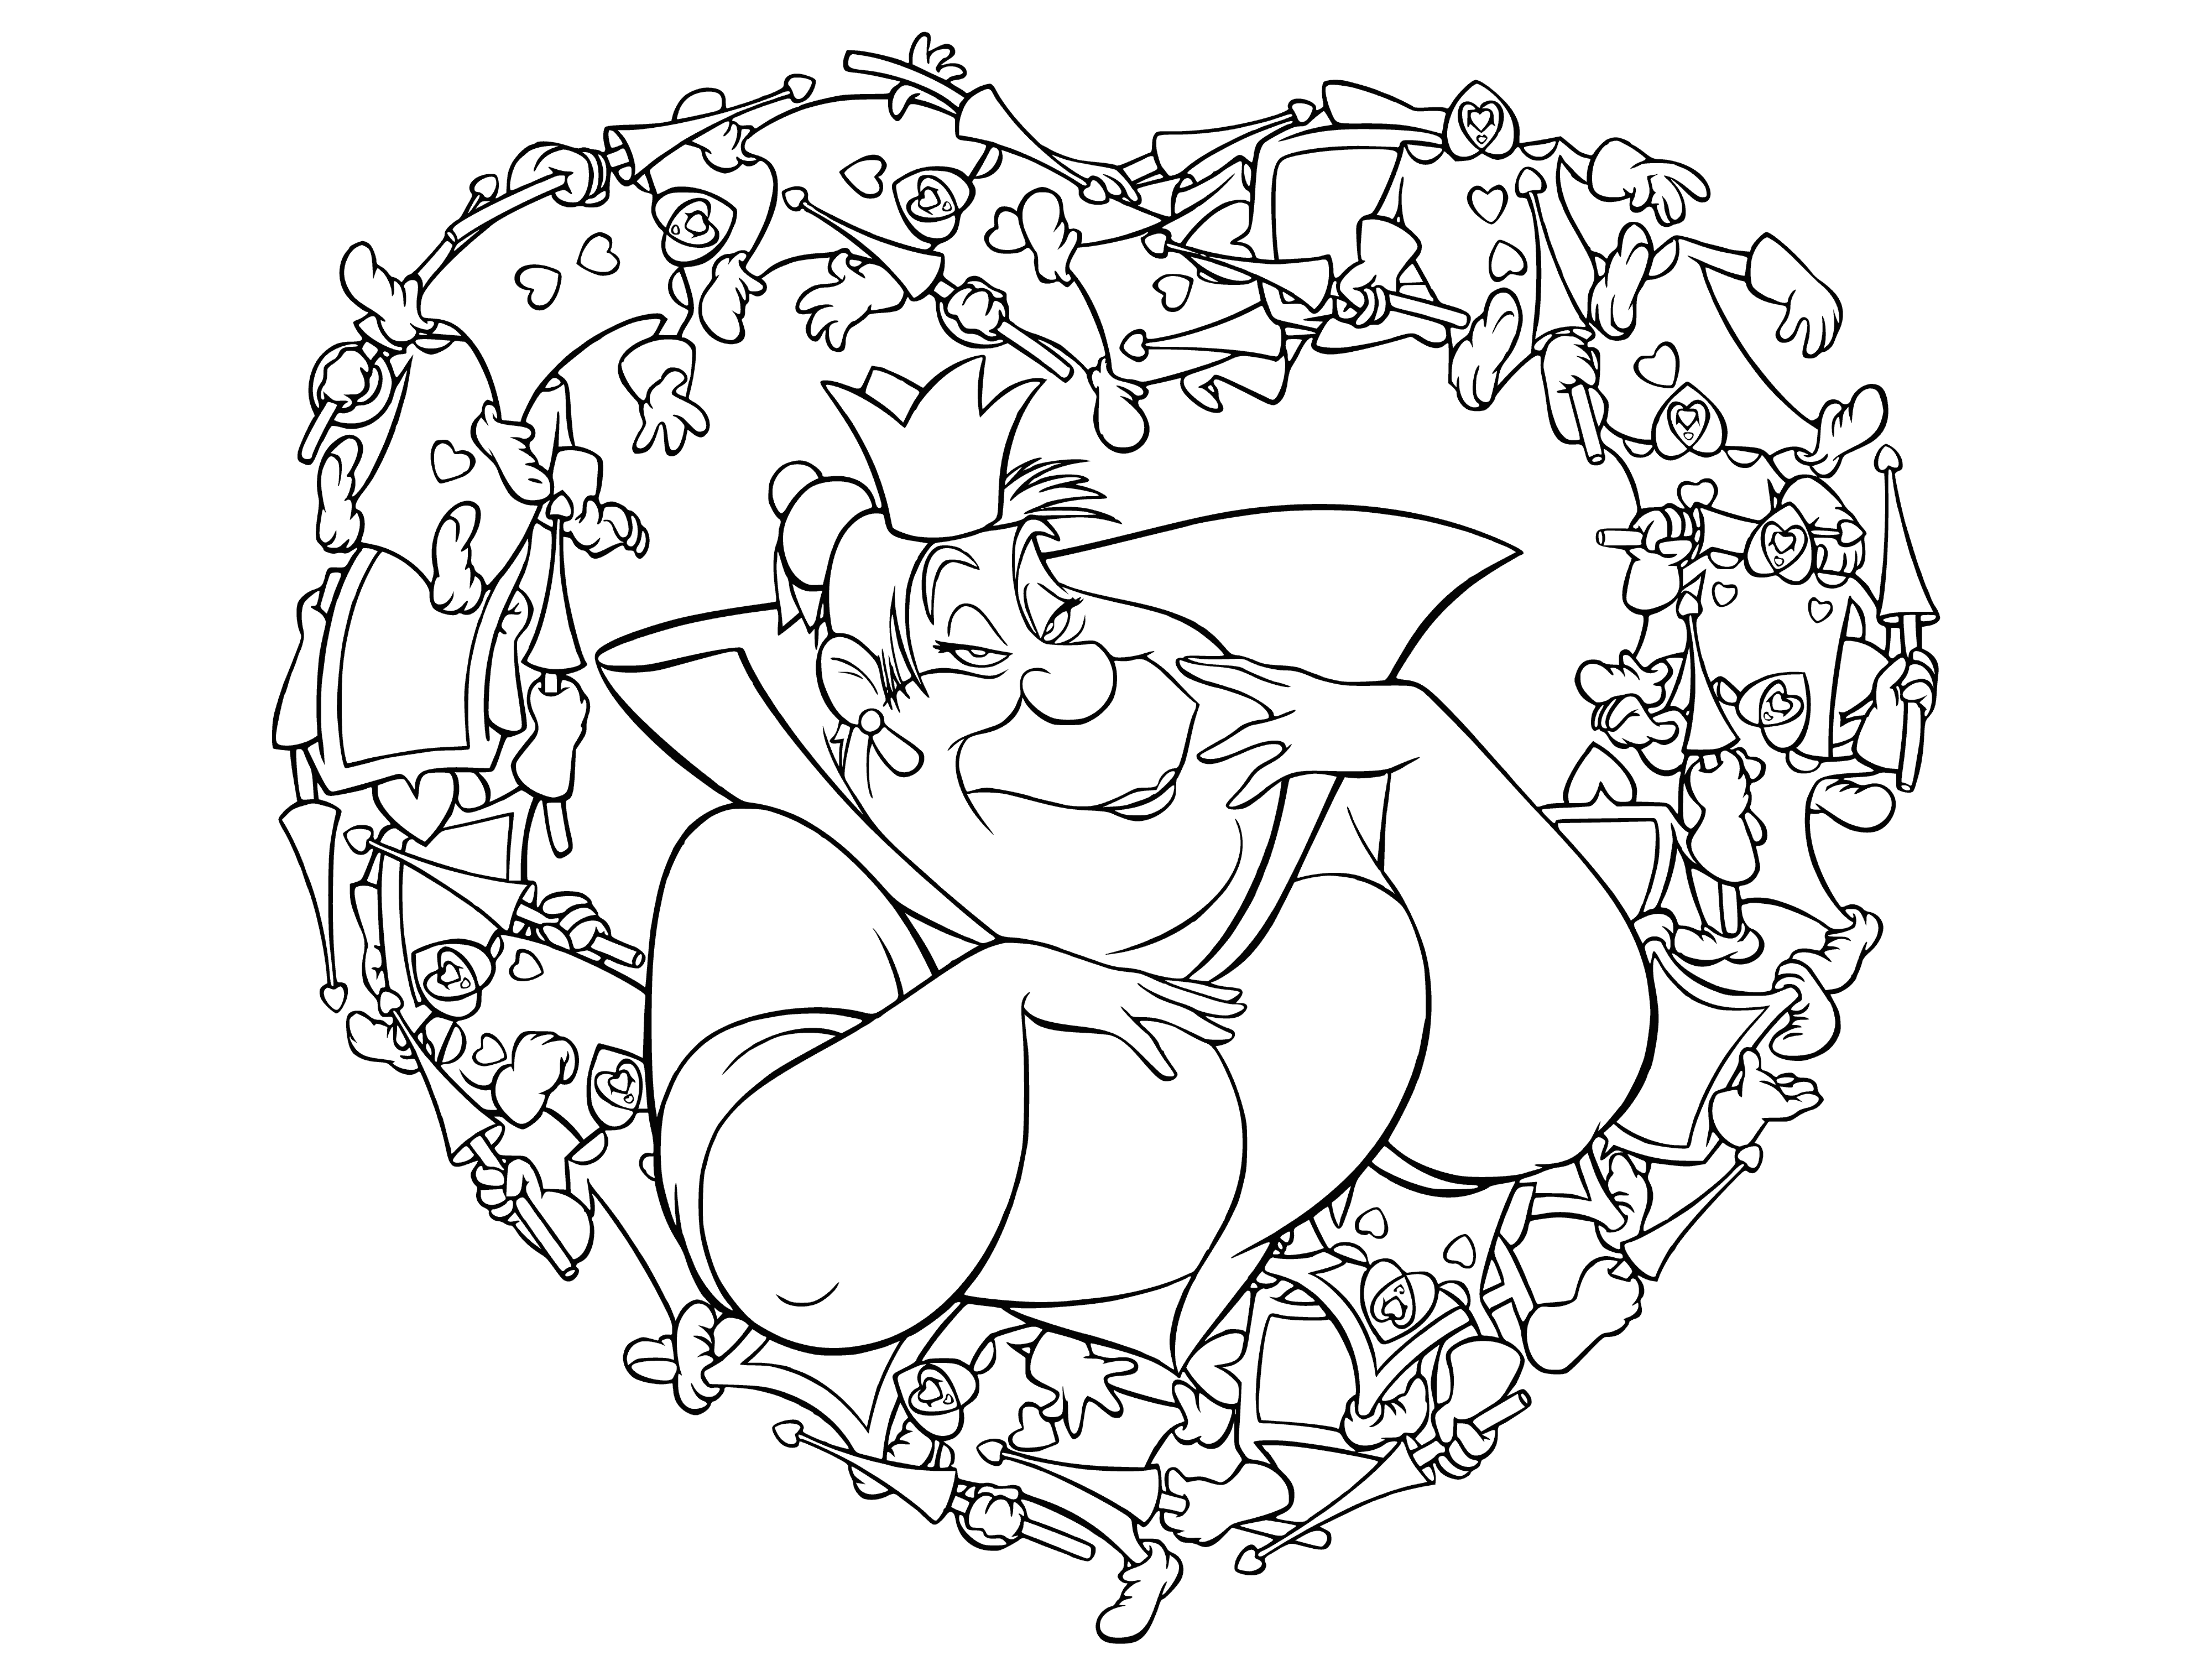 Queen of hearts coloring page